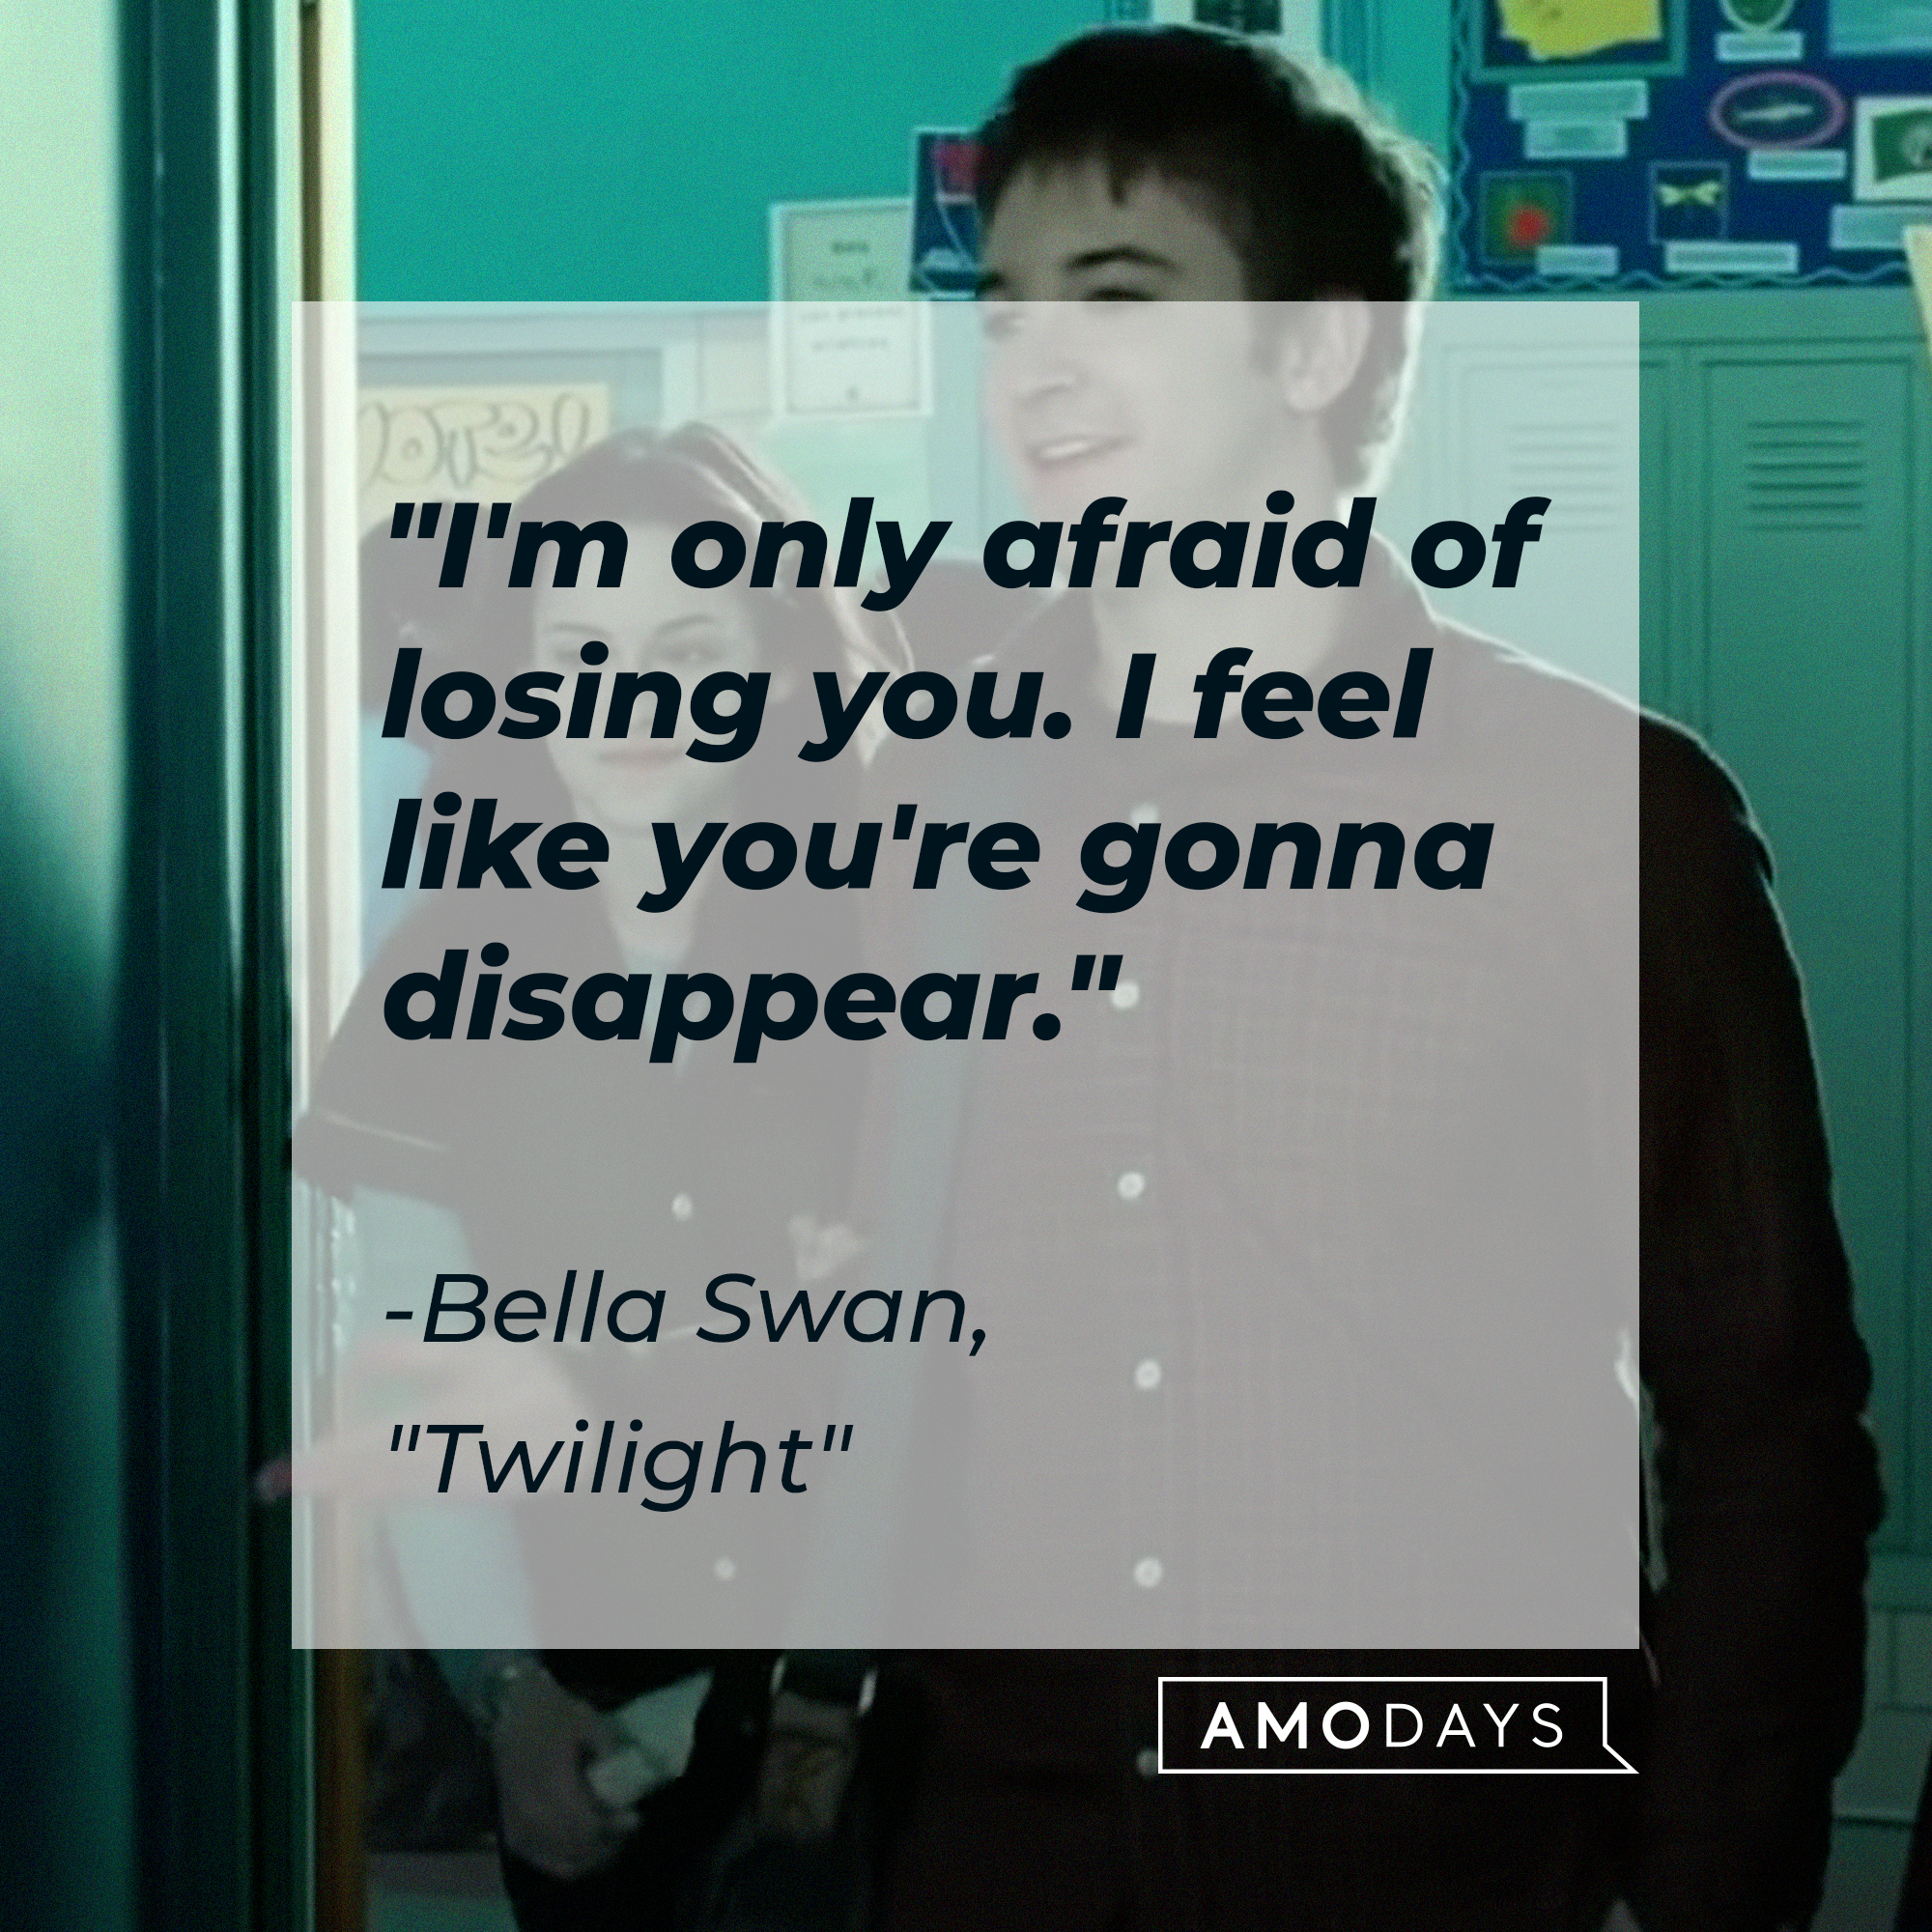 Bella Swan with her quote: "I'm only afraid of losing you. I feel like you're gonna disappear." | Source: Facebook.com/twilight